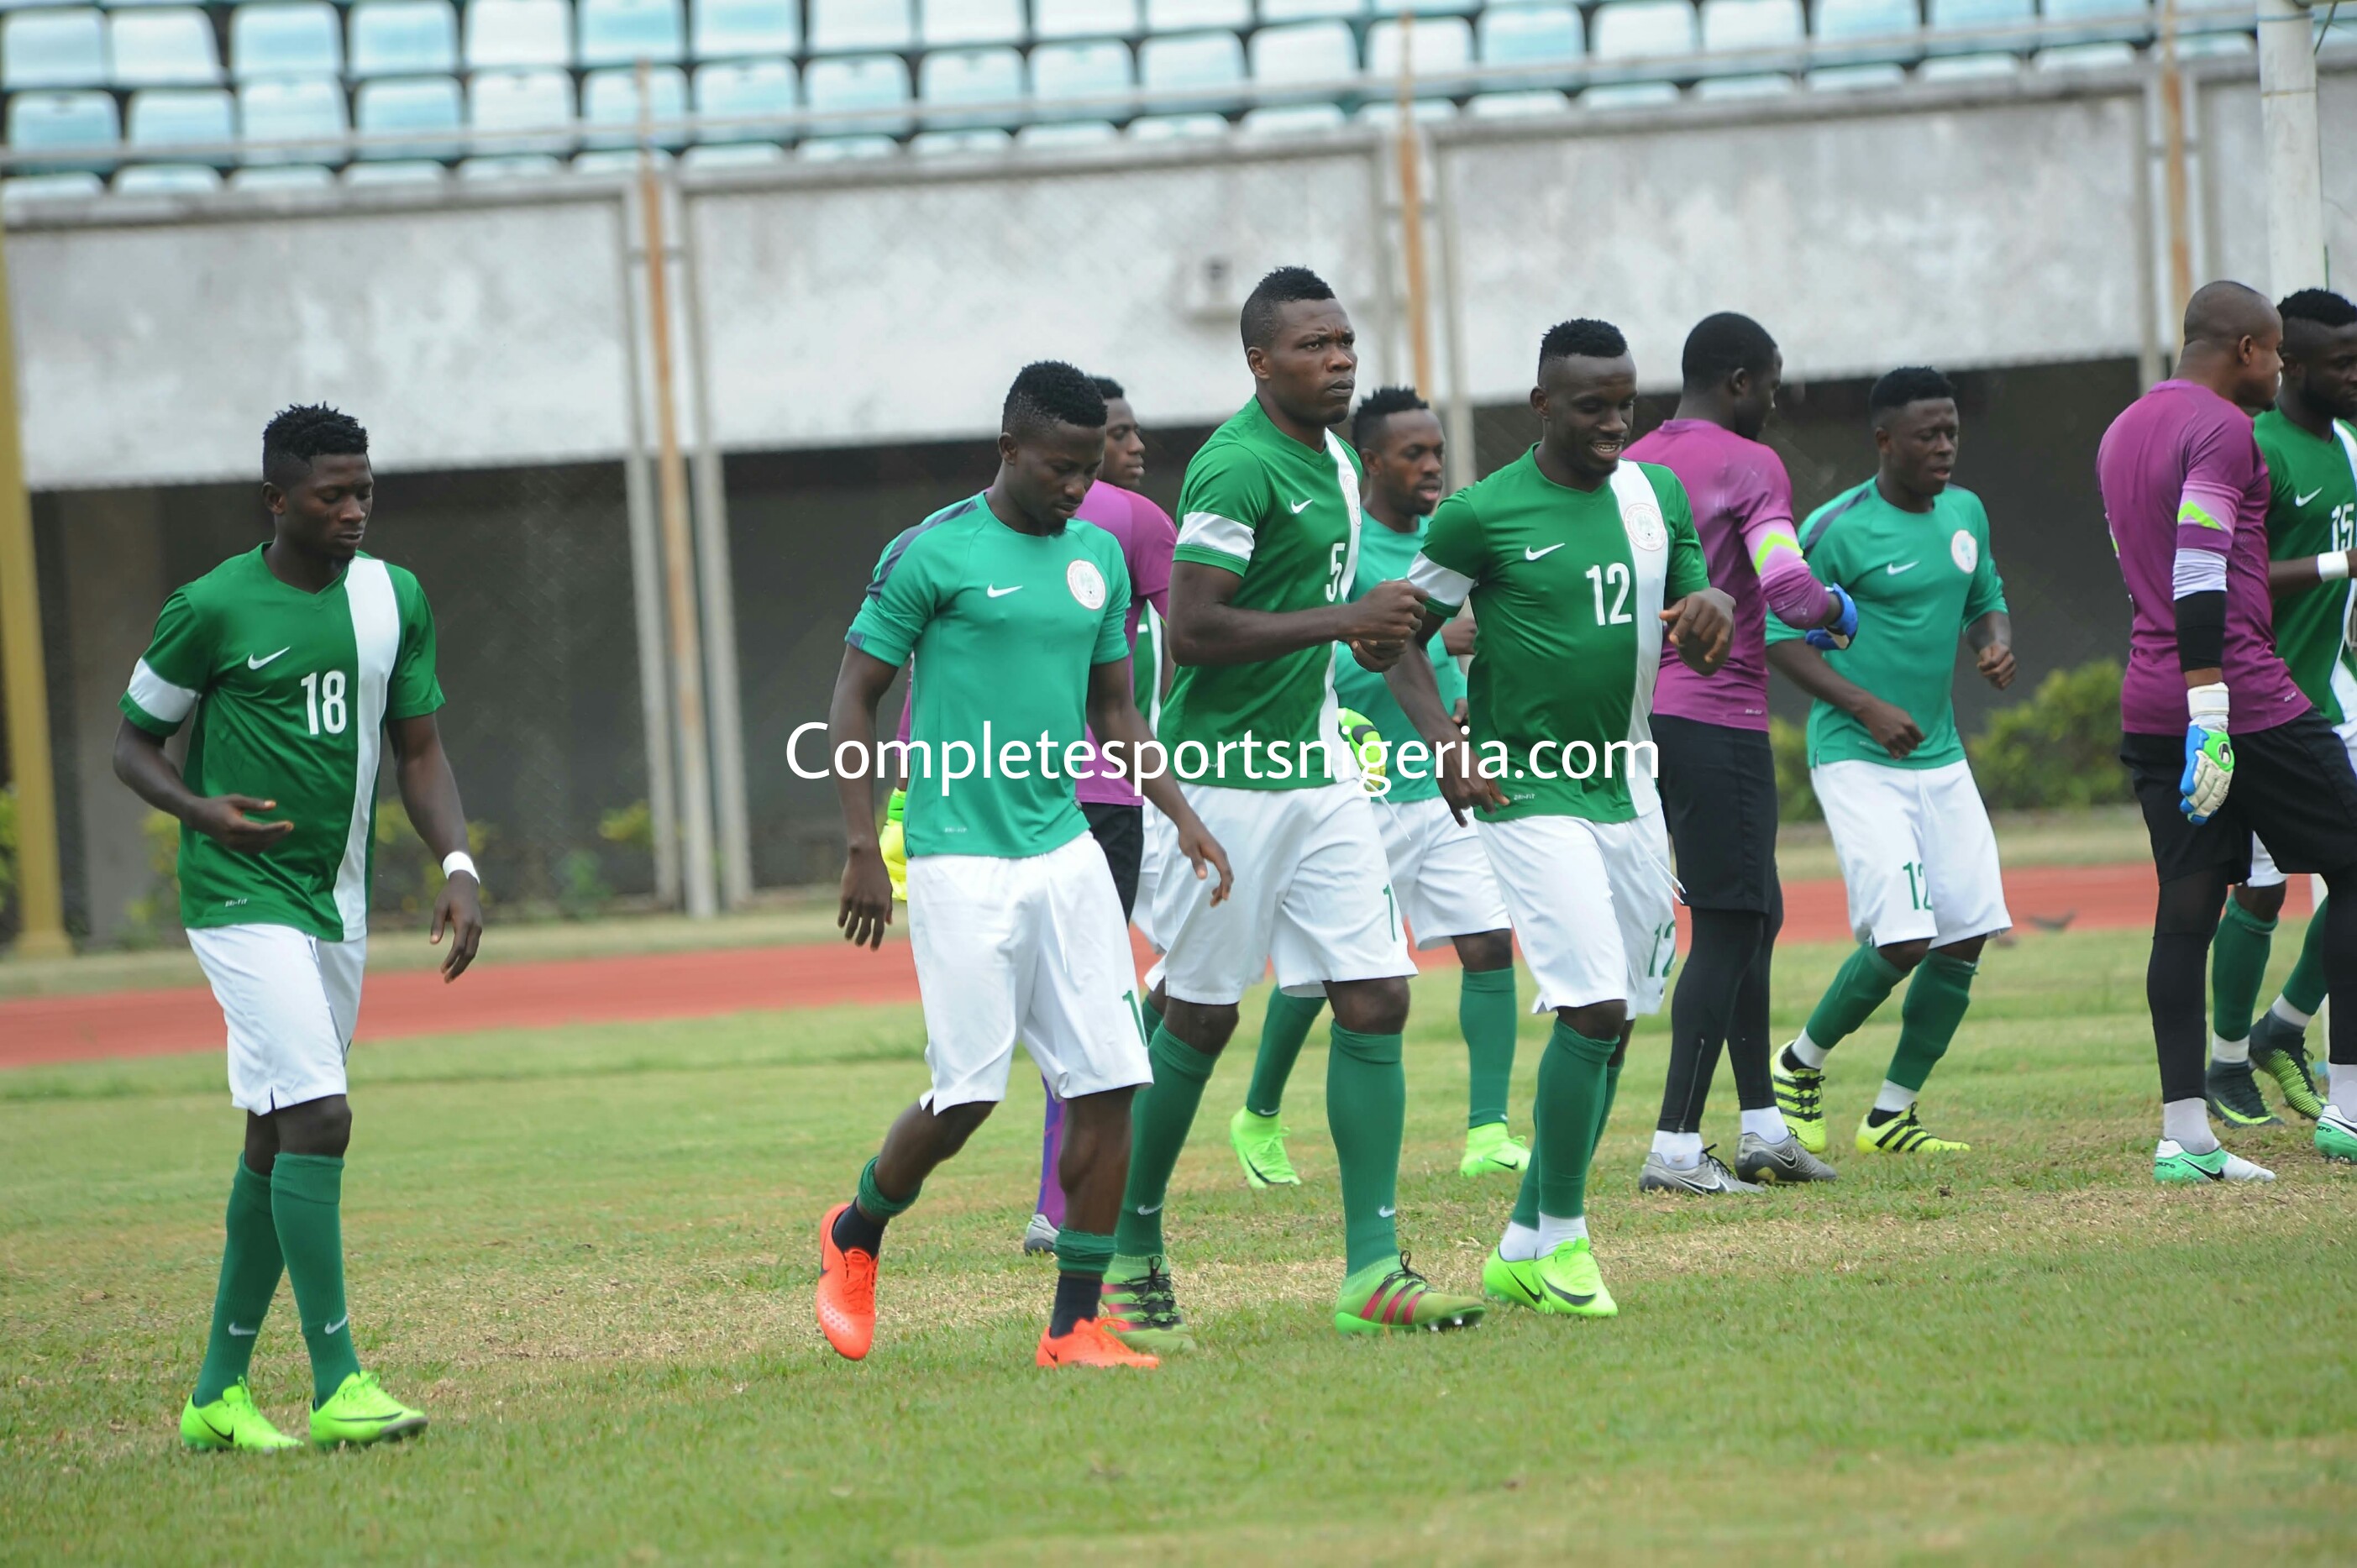 OGA NA MASTER: Nigeria Vastly Superior To Benin In Past Meetings